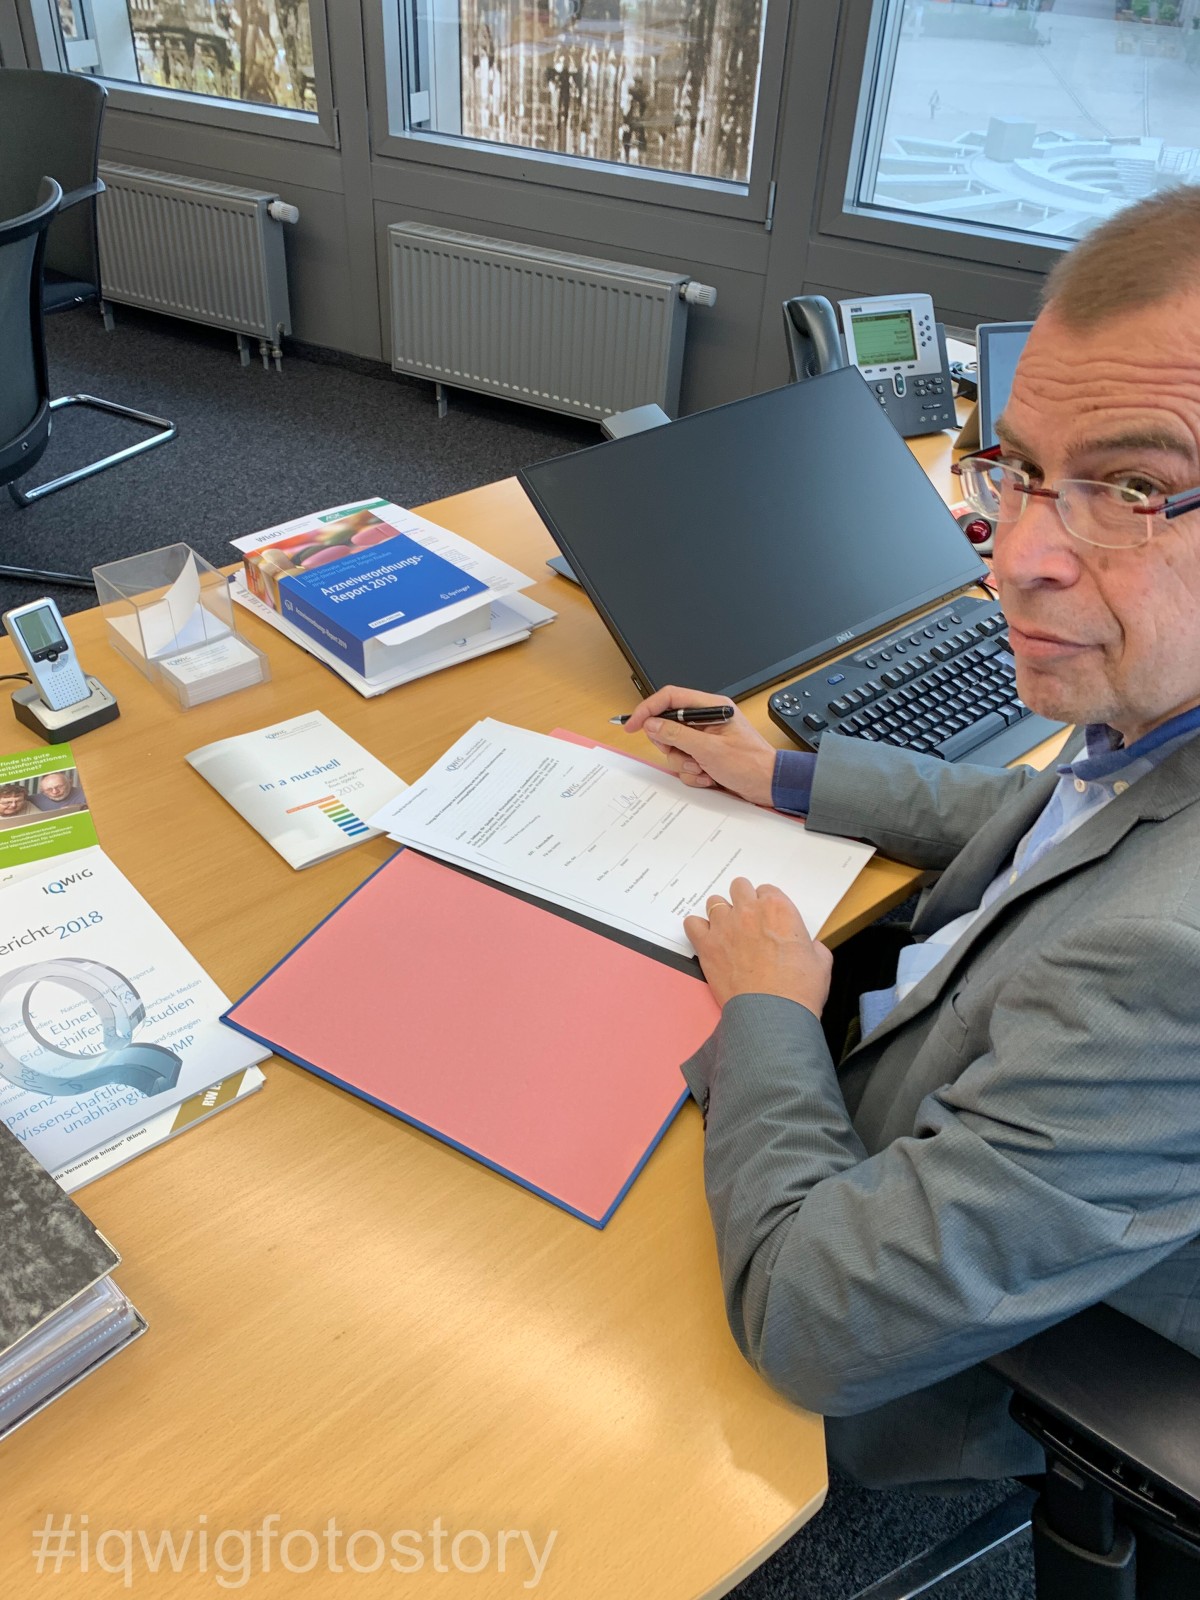 A man is sitting at a desk, looking at the camera. He has short hair, and is wearing glasses and a grey jacket with a light blue shirt underneath. There are documents in front of him. He is holding a pen in his right hand. On the table are books, pamphlets, a computer keyboard, a screen and a telephone. There are windows in the background to the right.